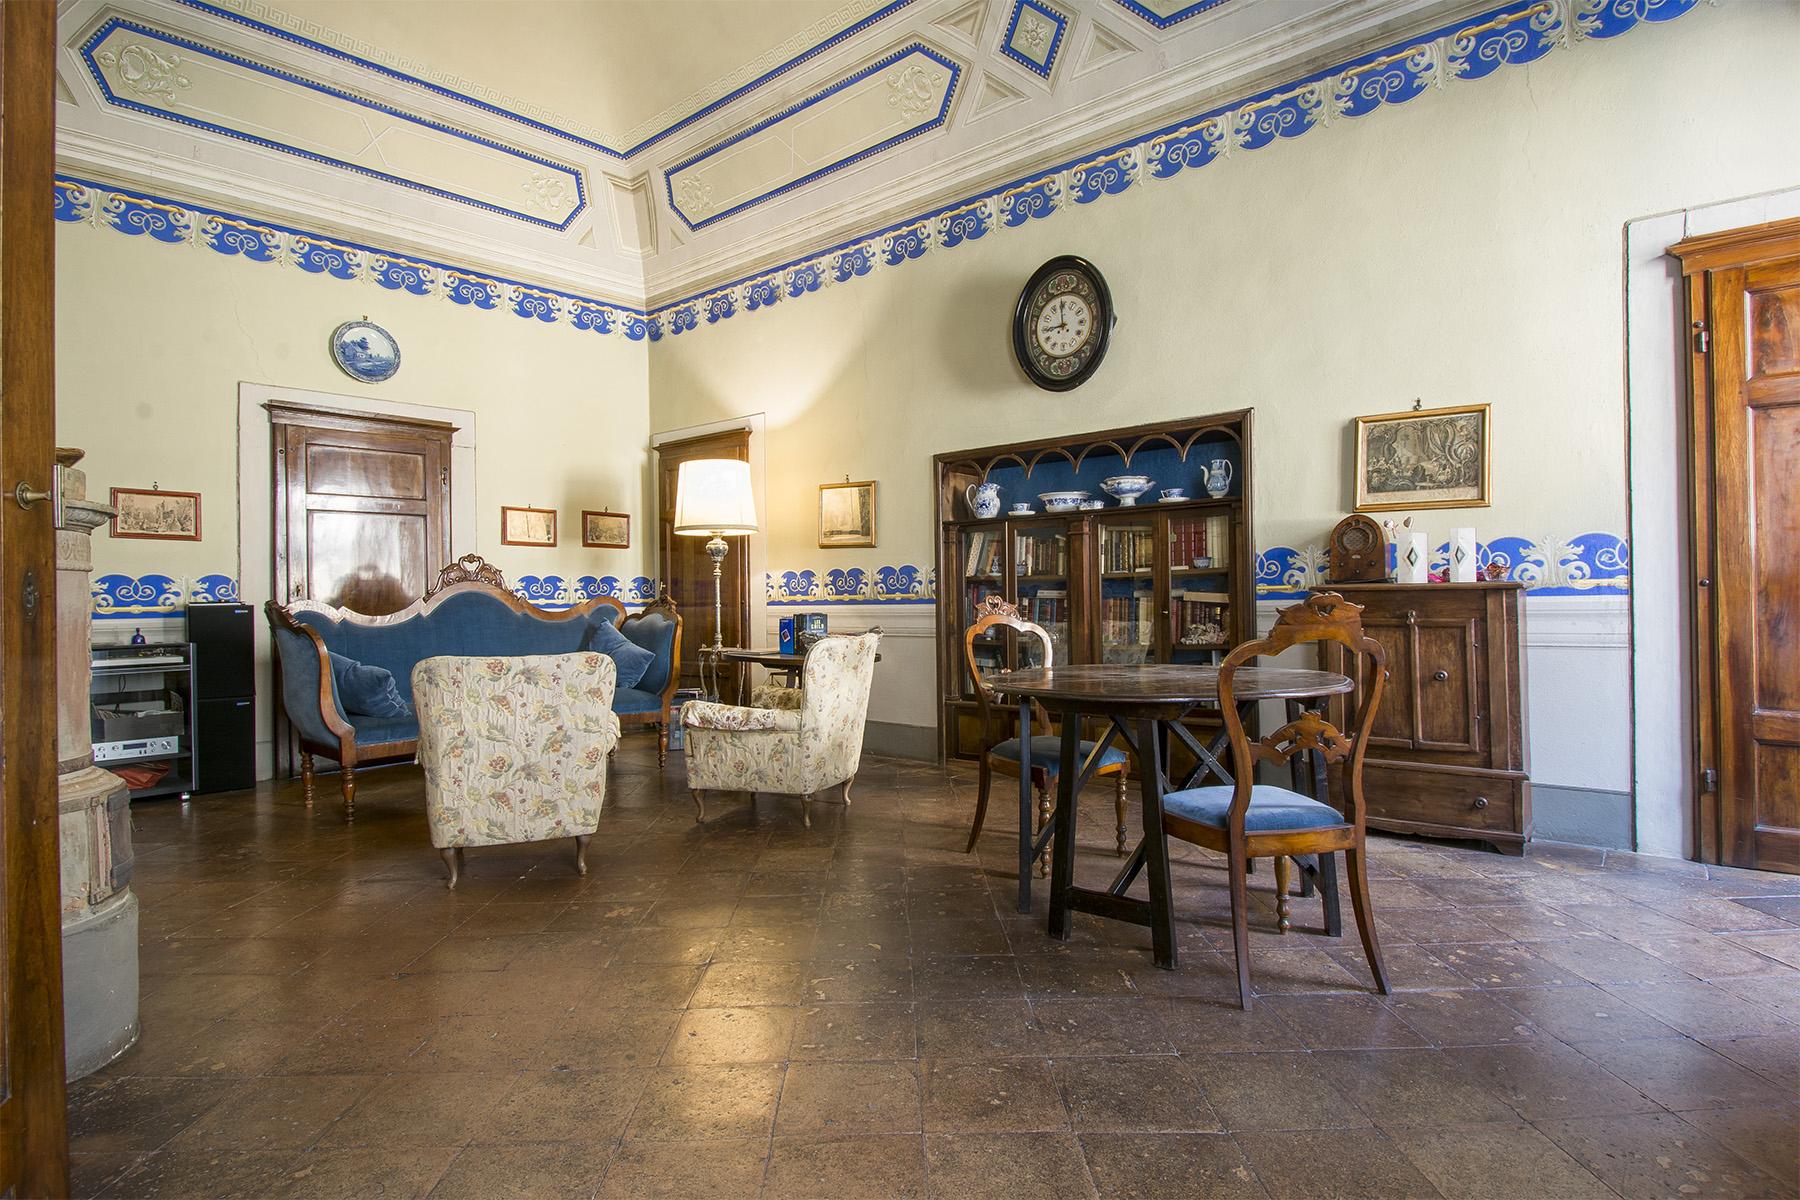 17th-century noble palace in the heart of Volterra - 11